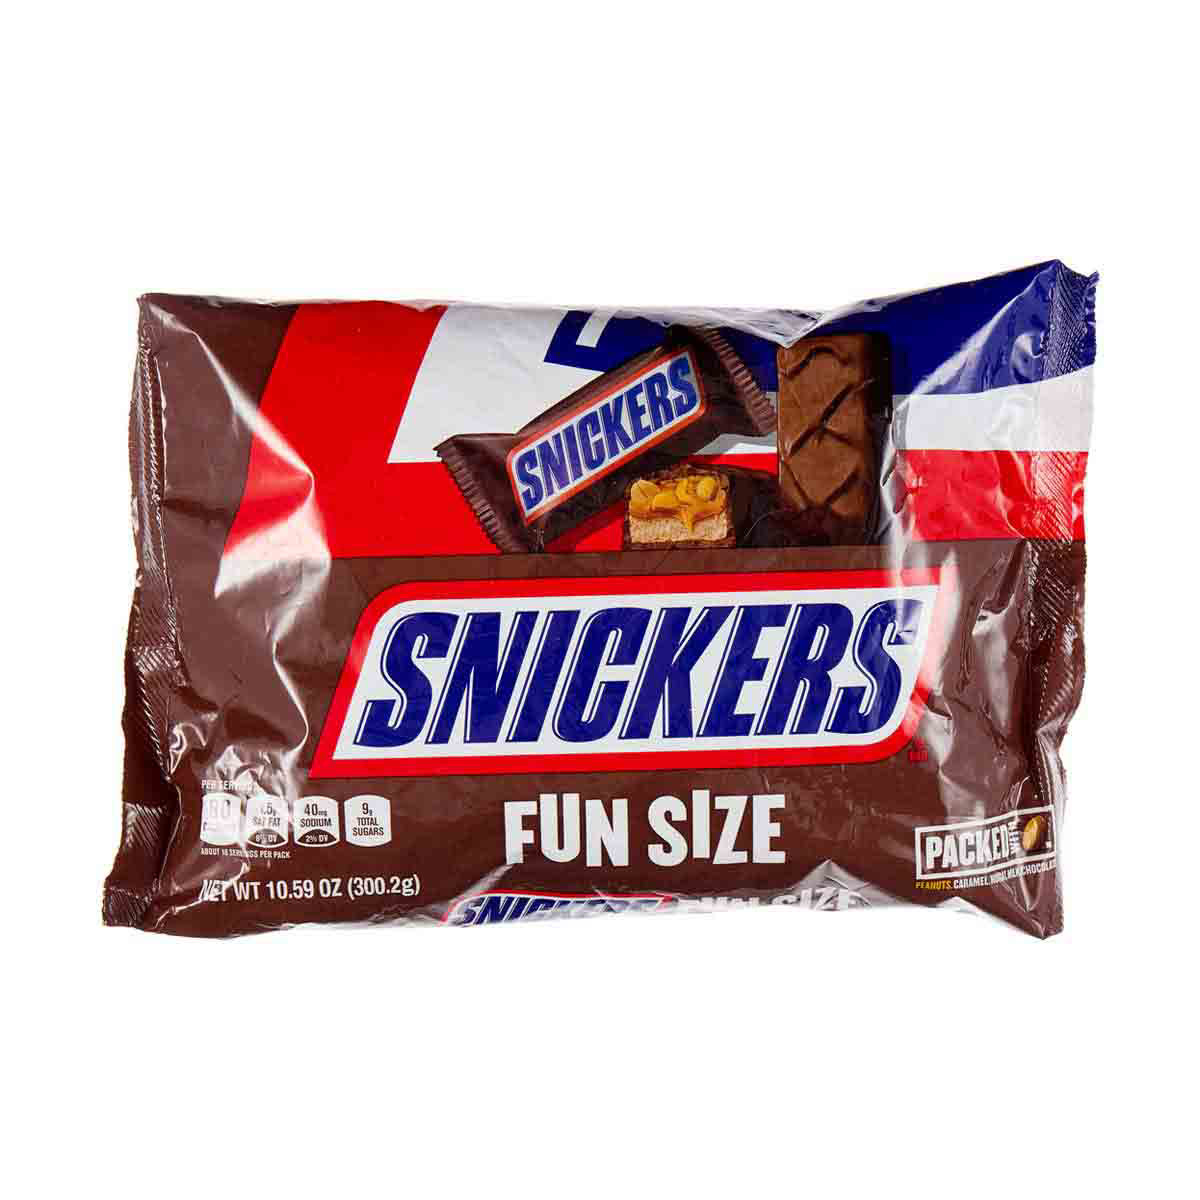 Snickers Fun Size Chocolate Candy, 10.59 oz.